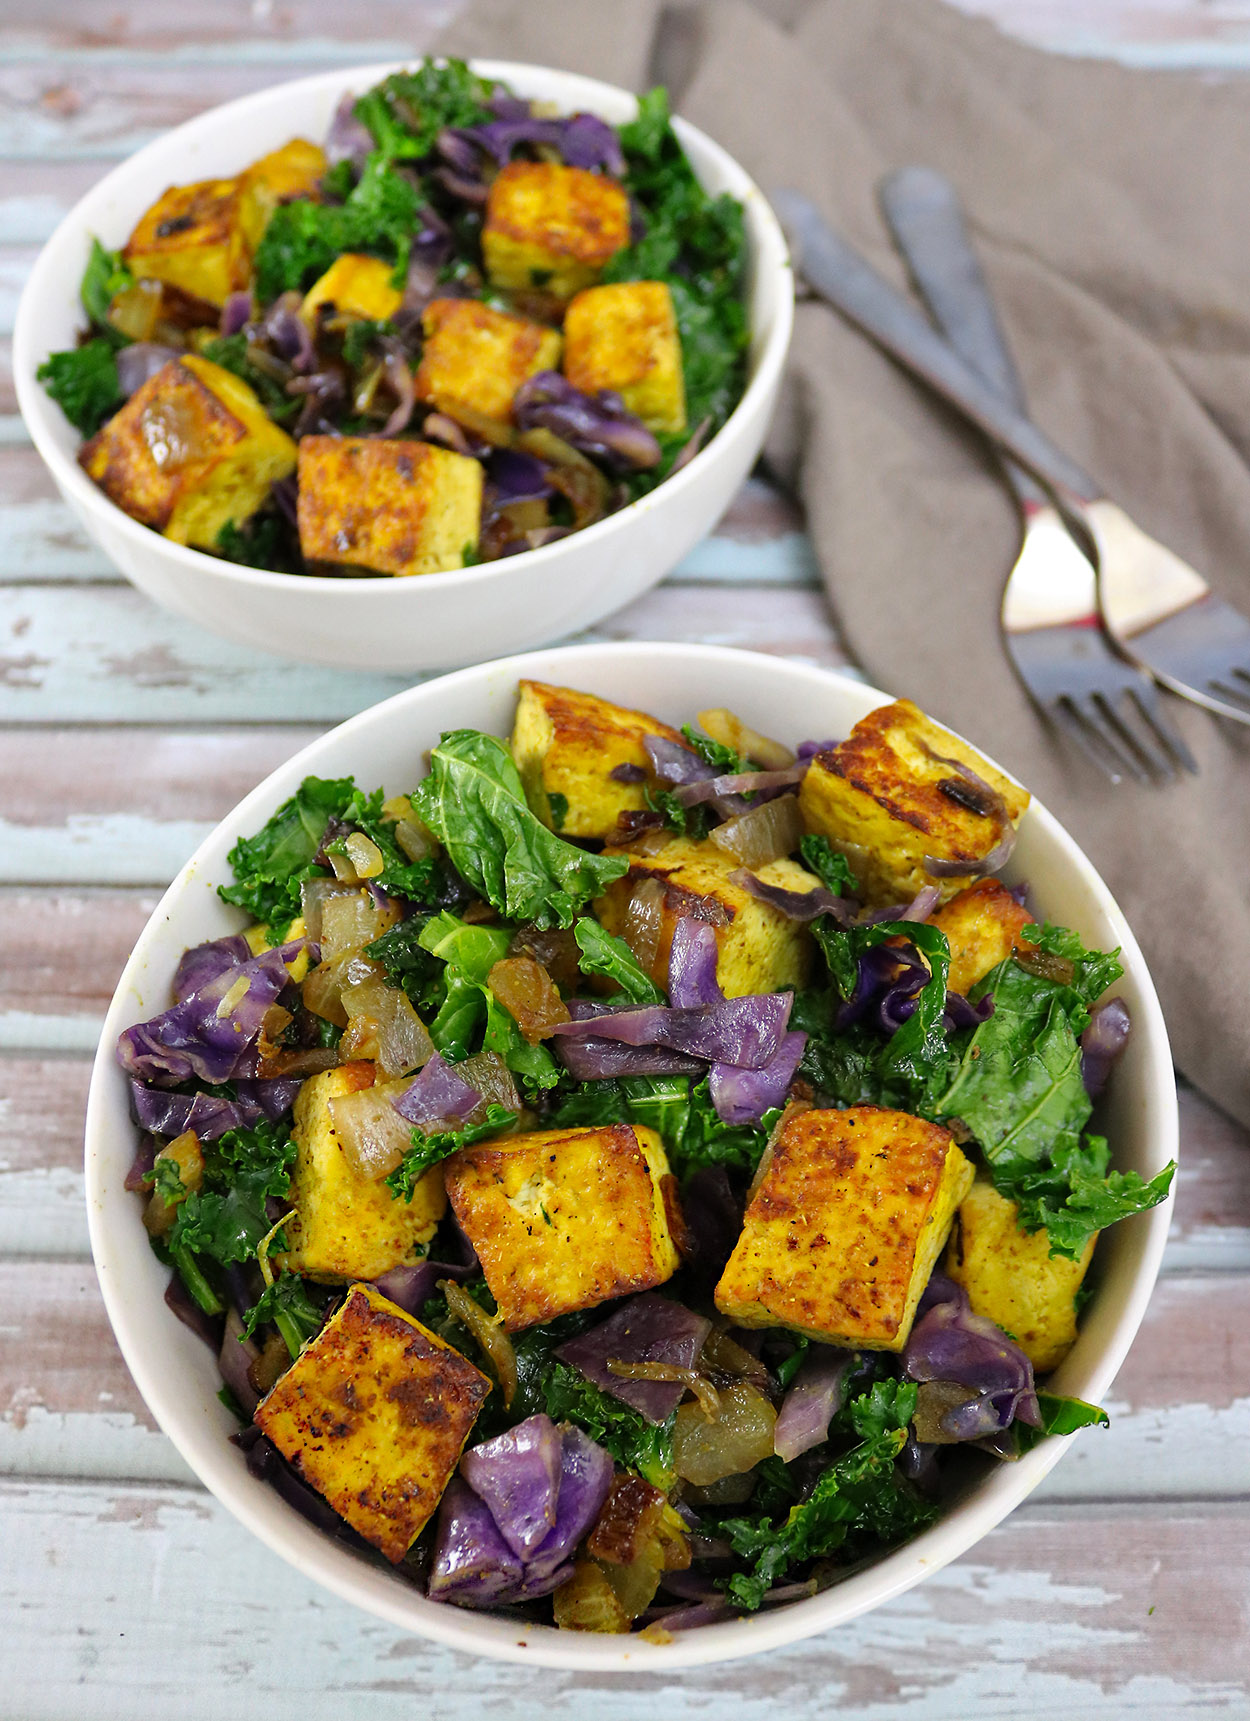 Spiced Tofu with Kale and Cabbage Salad